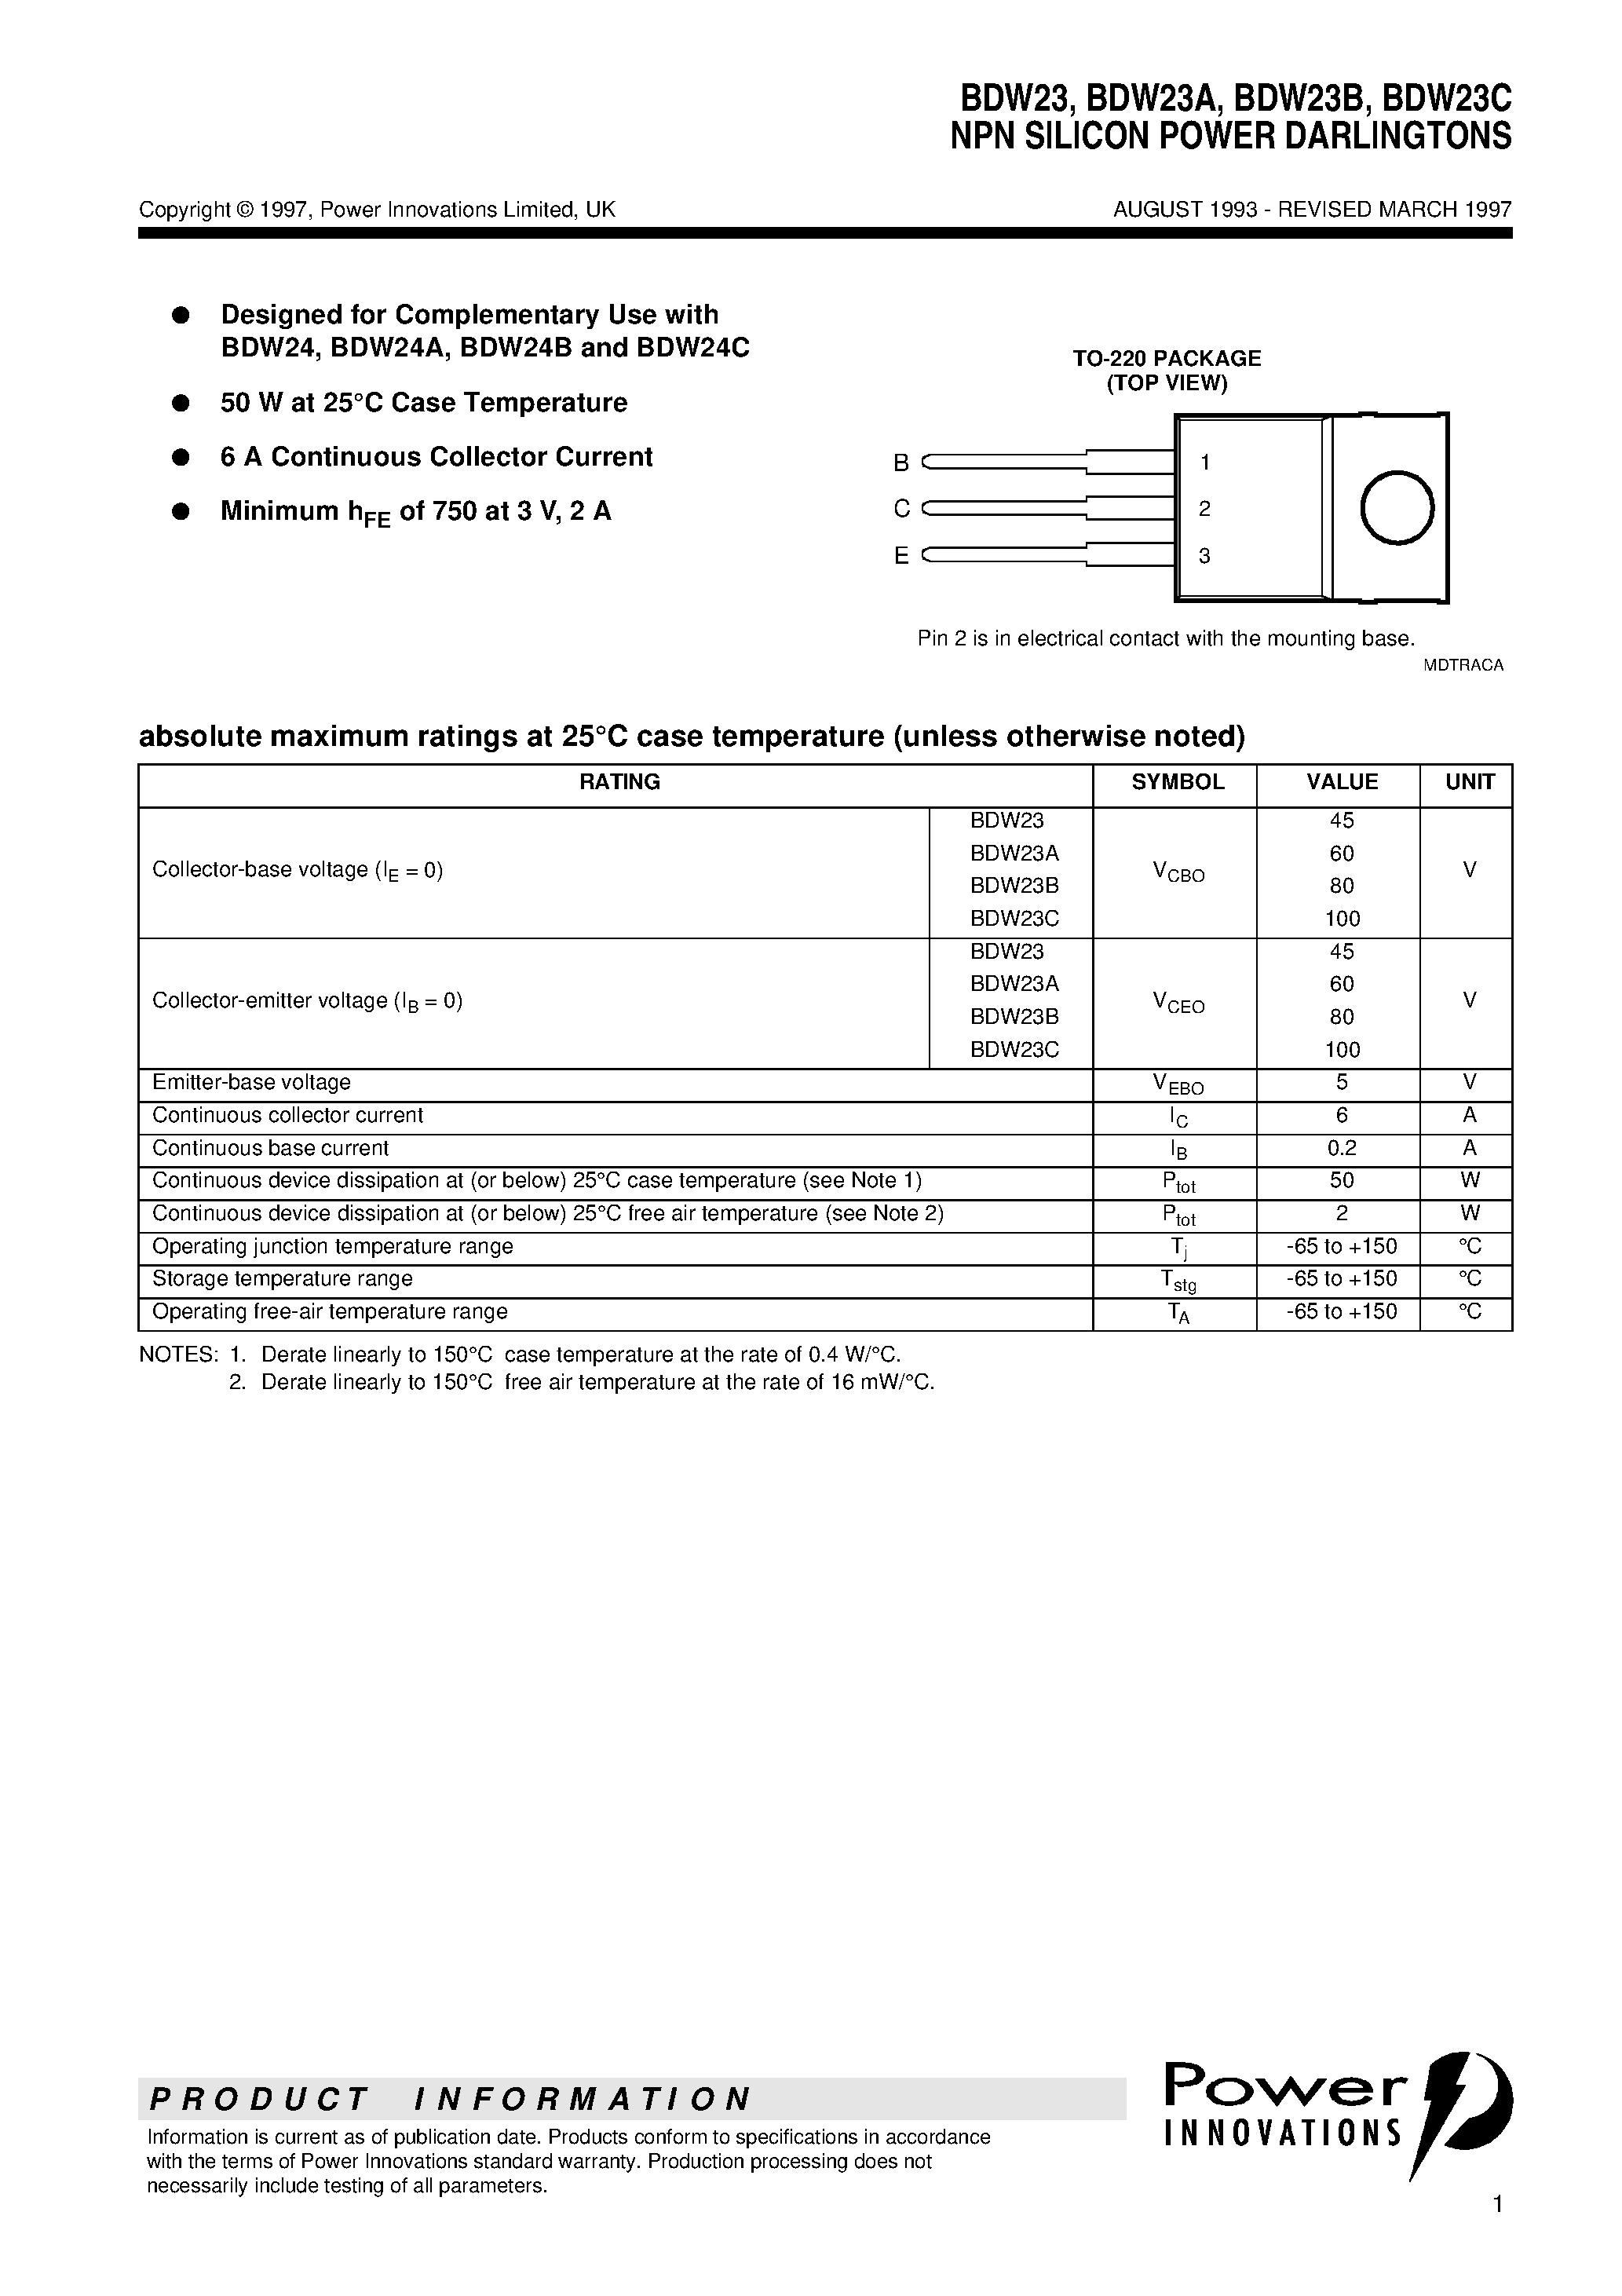 Datasheet BDW23A - NPN SILICON POWER DARLINGTONS page 1